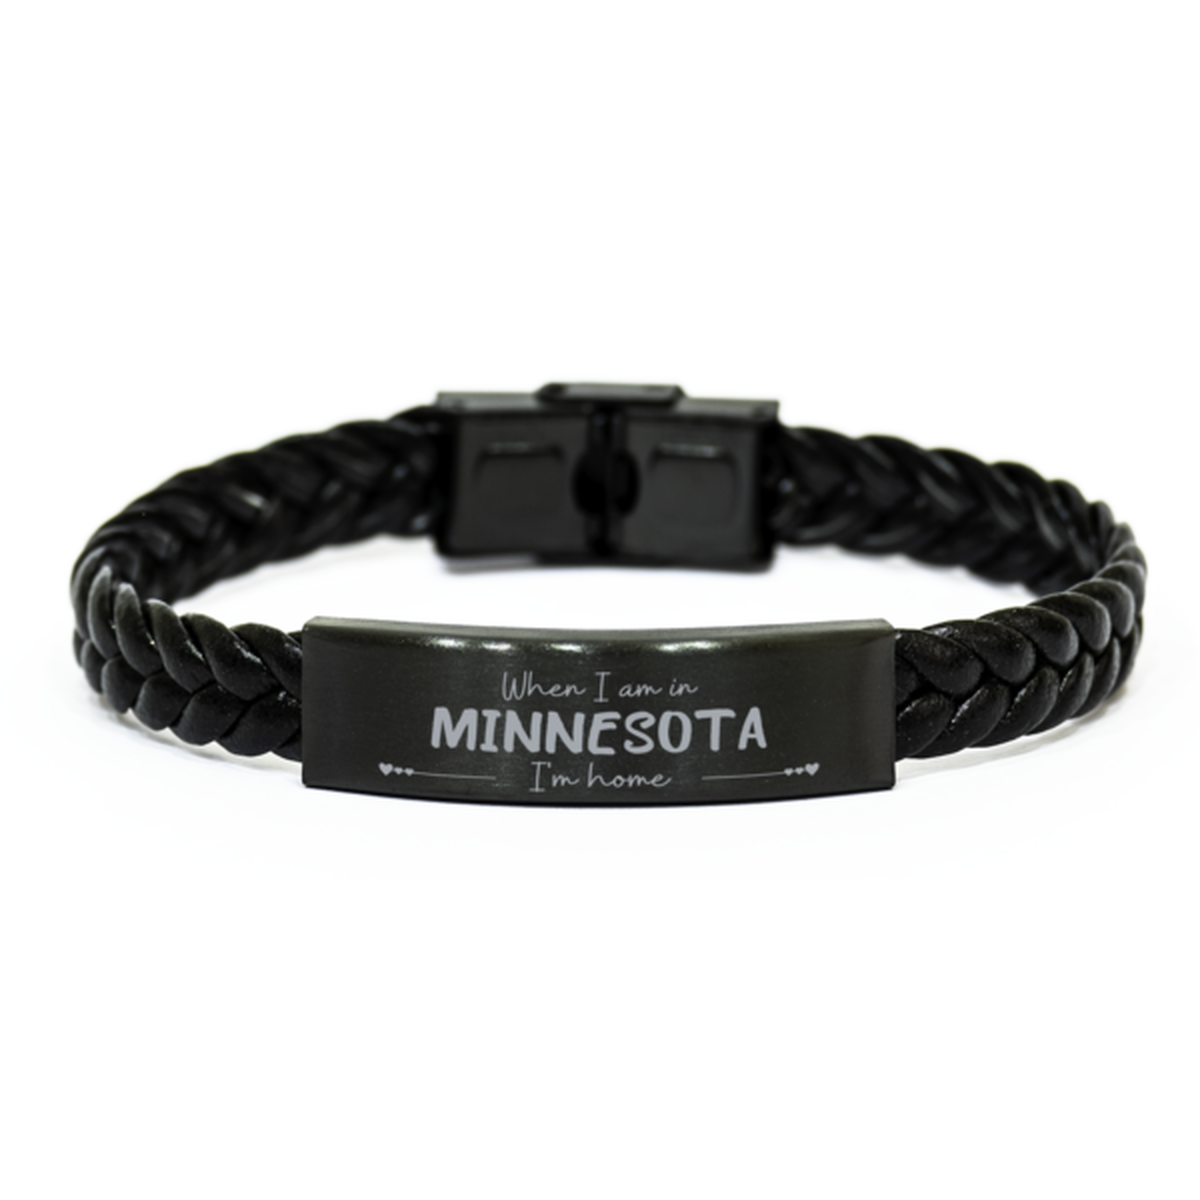 When I am in Minnesota I'm home Braided Leather Bracelet, Cheap Gifts For Minnesota, State Minnesota Birthday Gifts for Friends Coworker